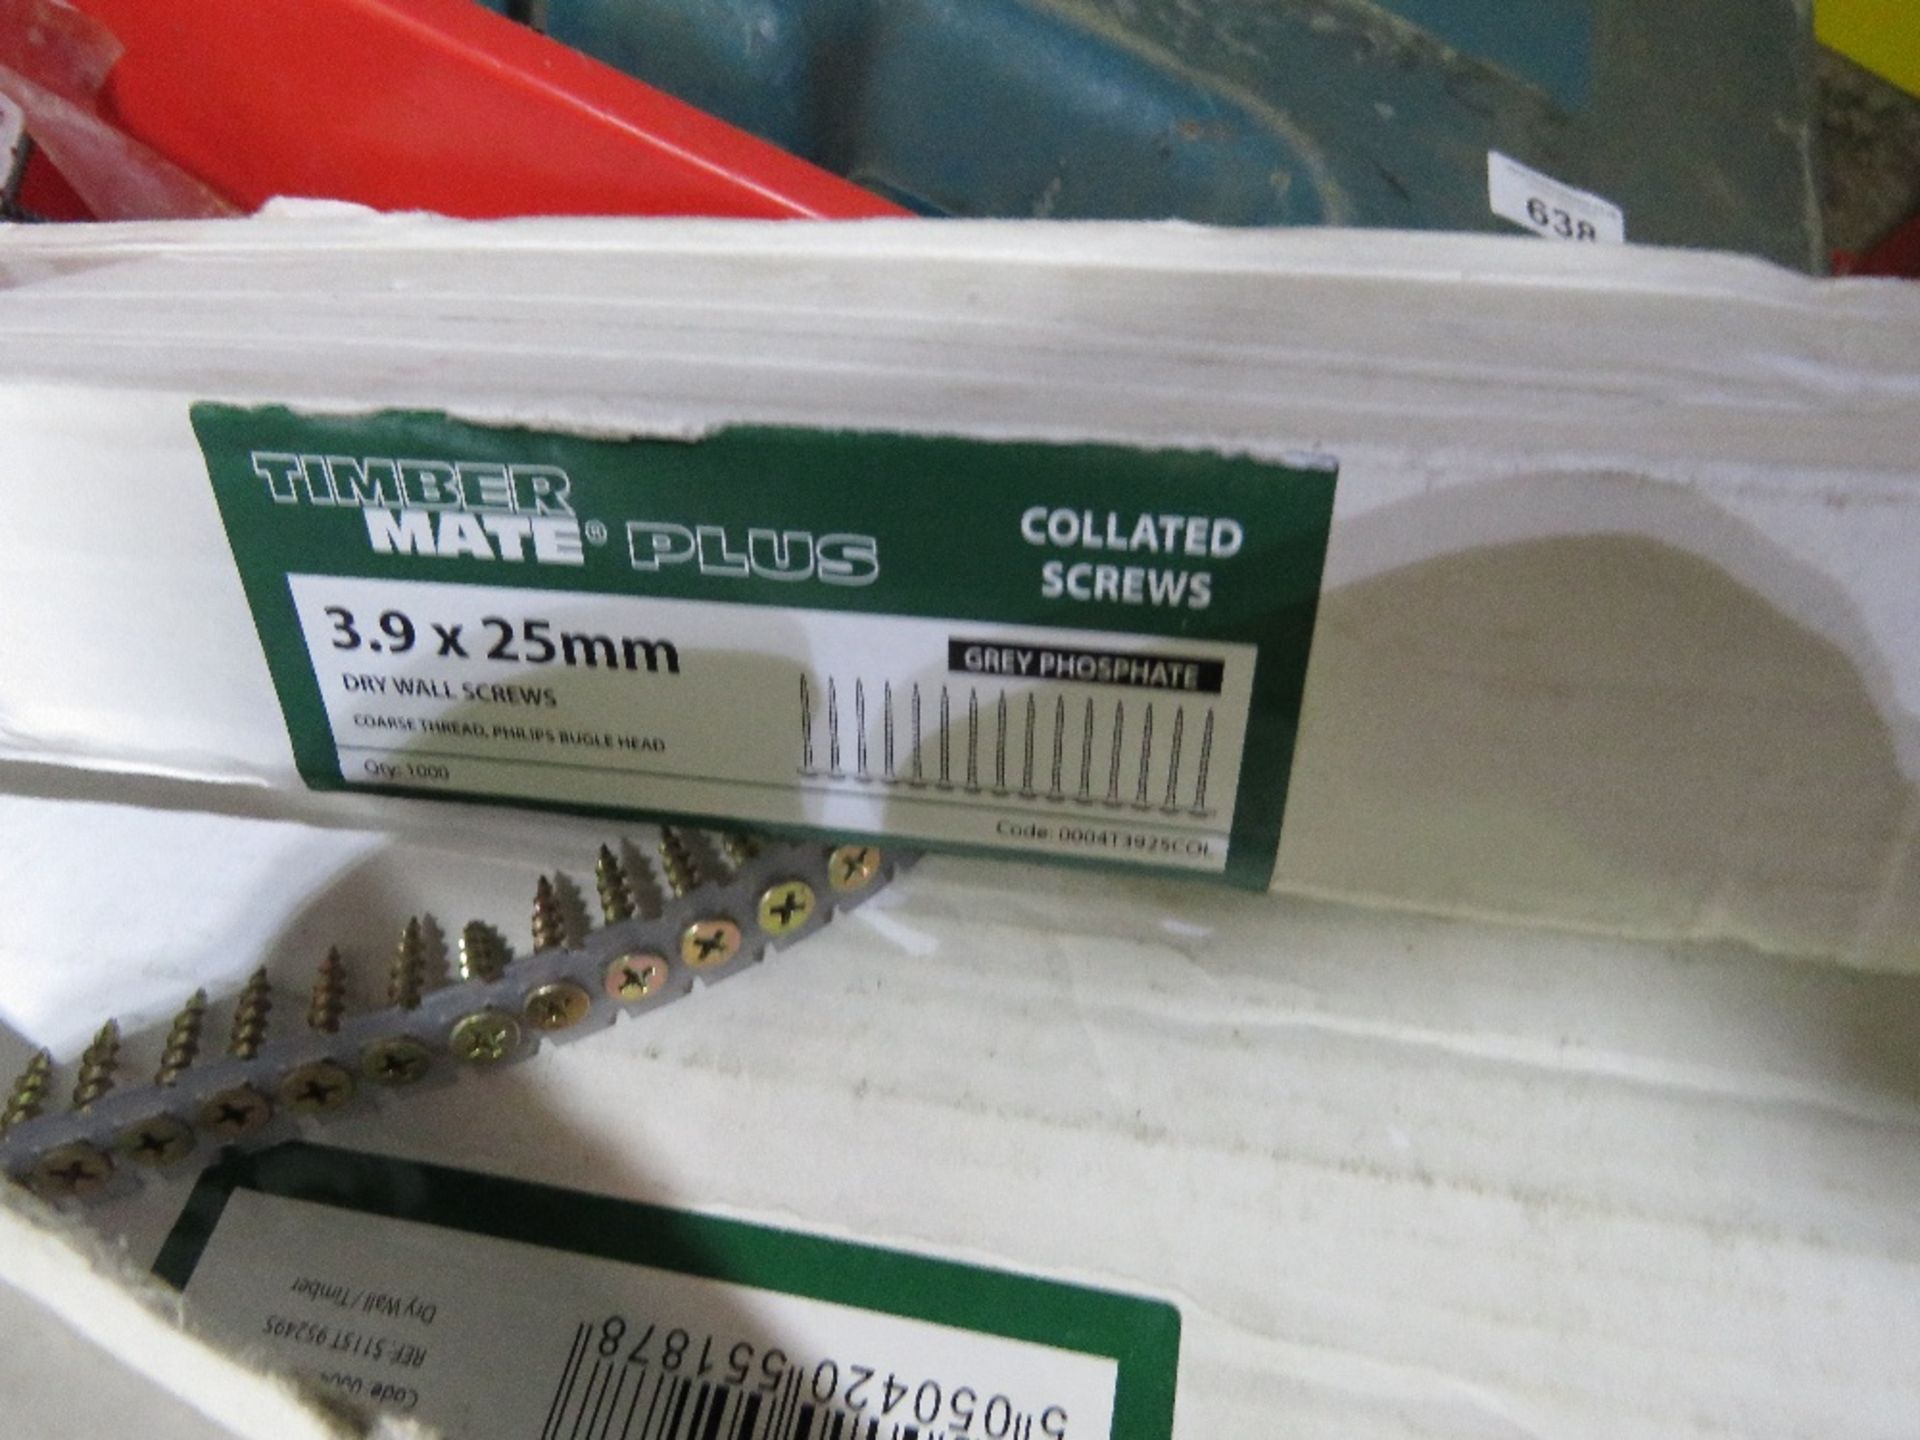 BOX OF COLLATED SCREWS. - Image 2 of 3